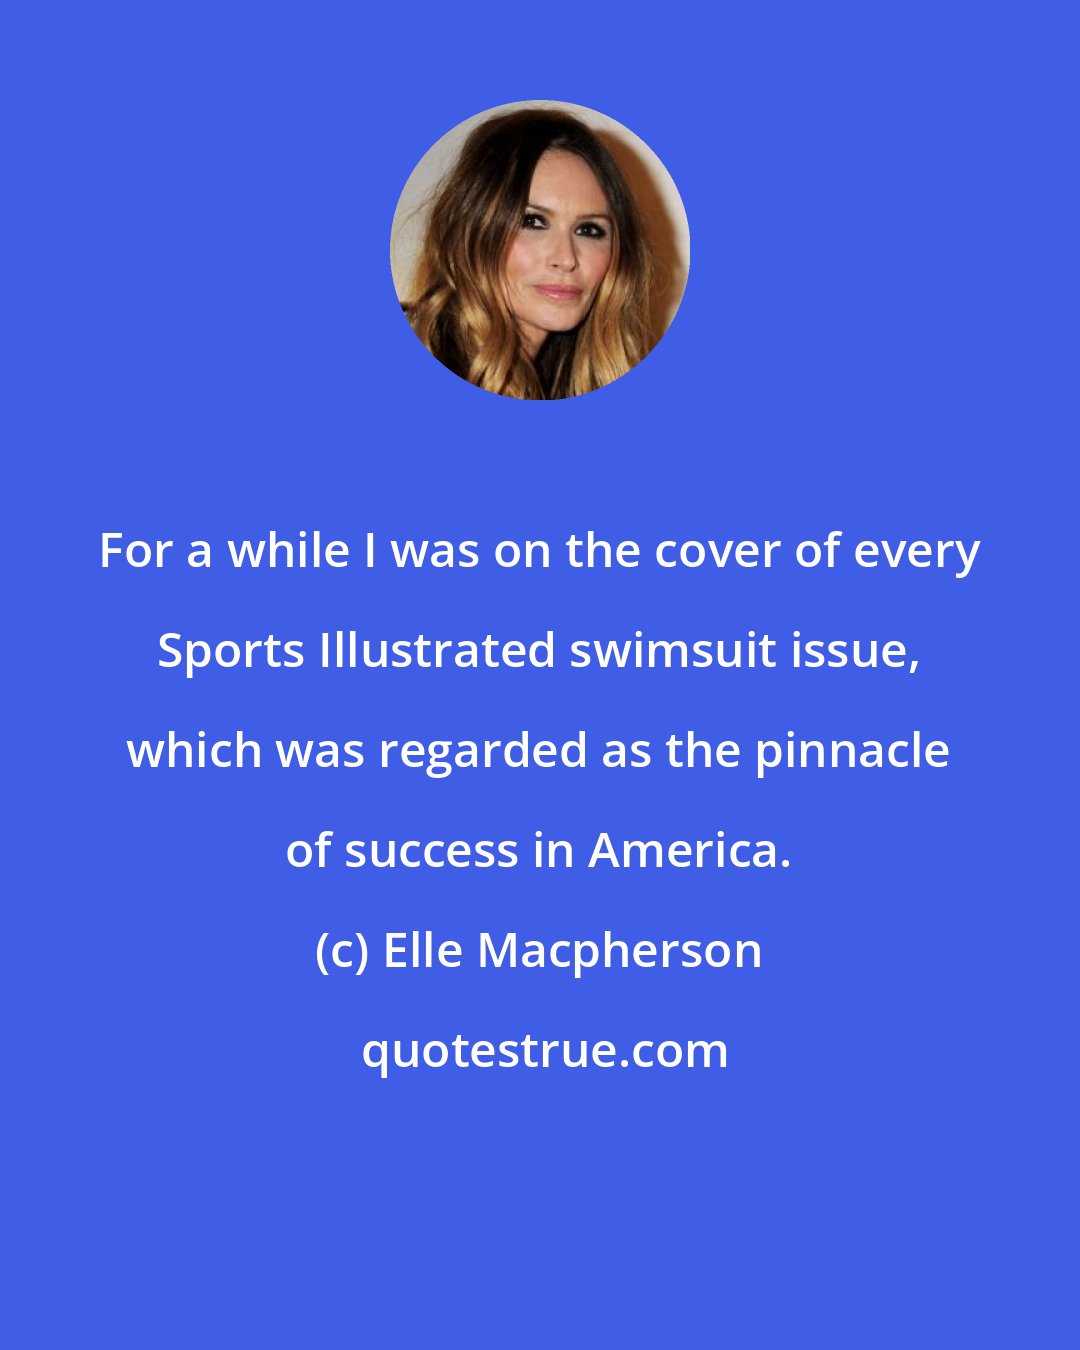 Elle Macpherson: For a while I was on the cover of every Sports Illustrated swimsuit issue, which was regarded as the pinnacle of success in America.